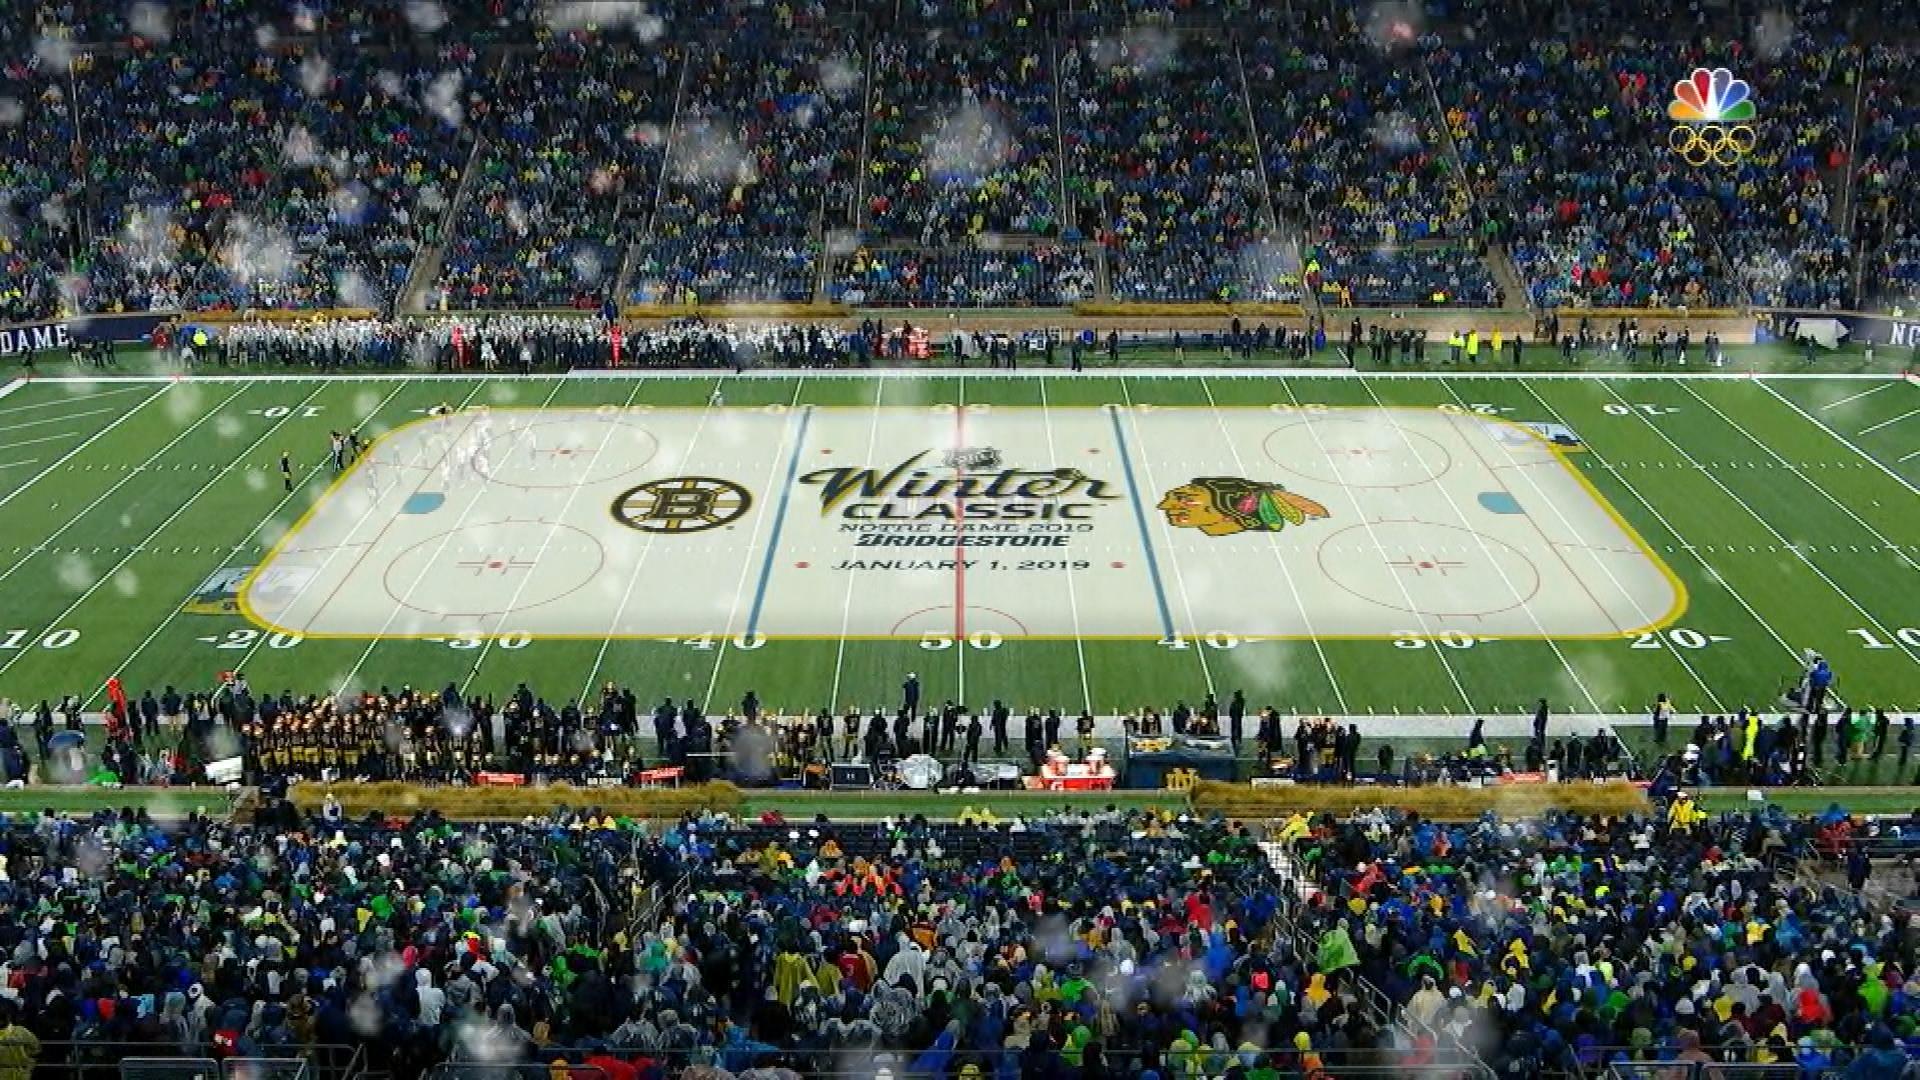 Bruins, Blackhawks to clash at Notre Dame Stadium for 2019 Winter